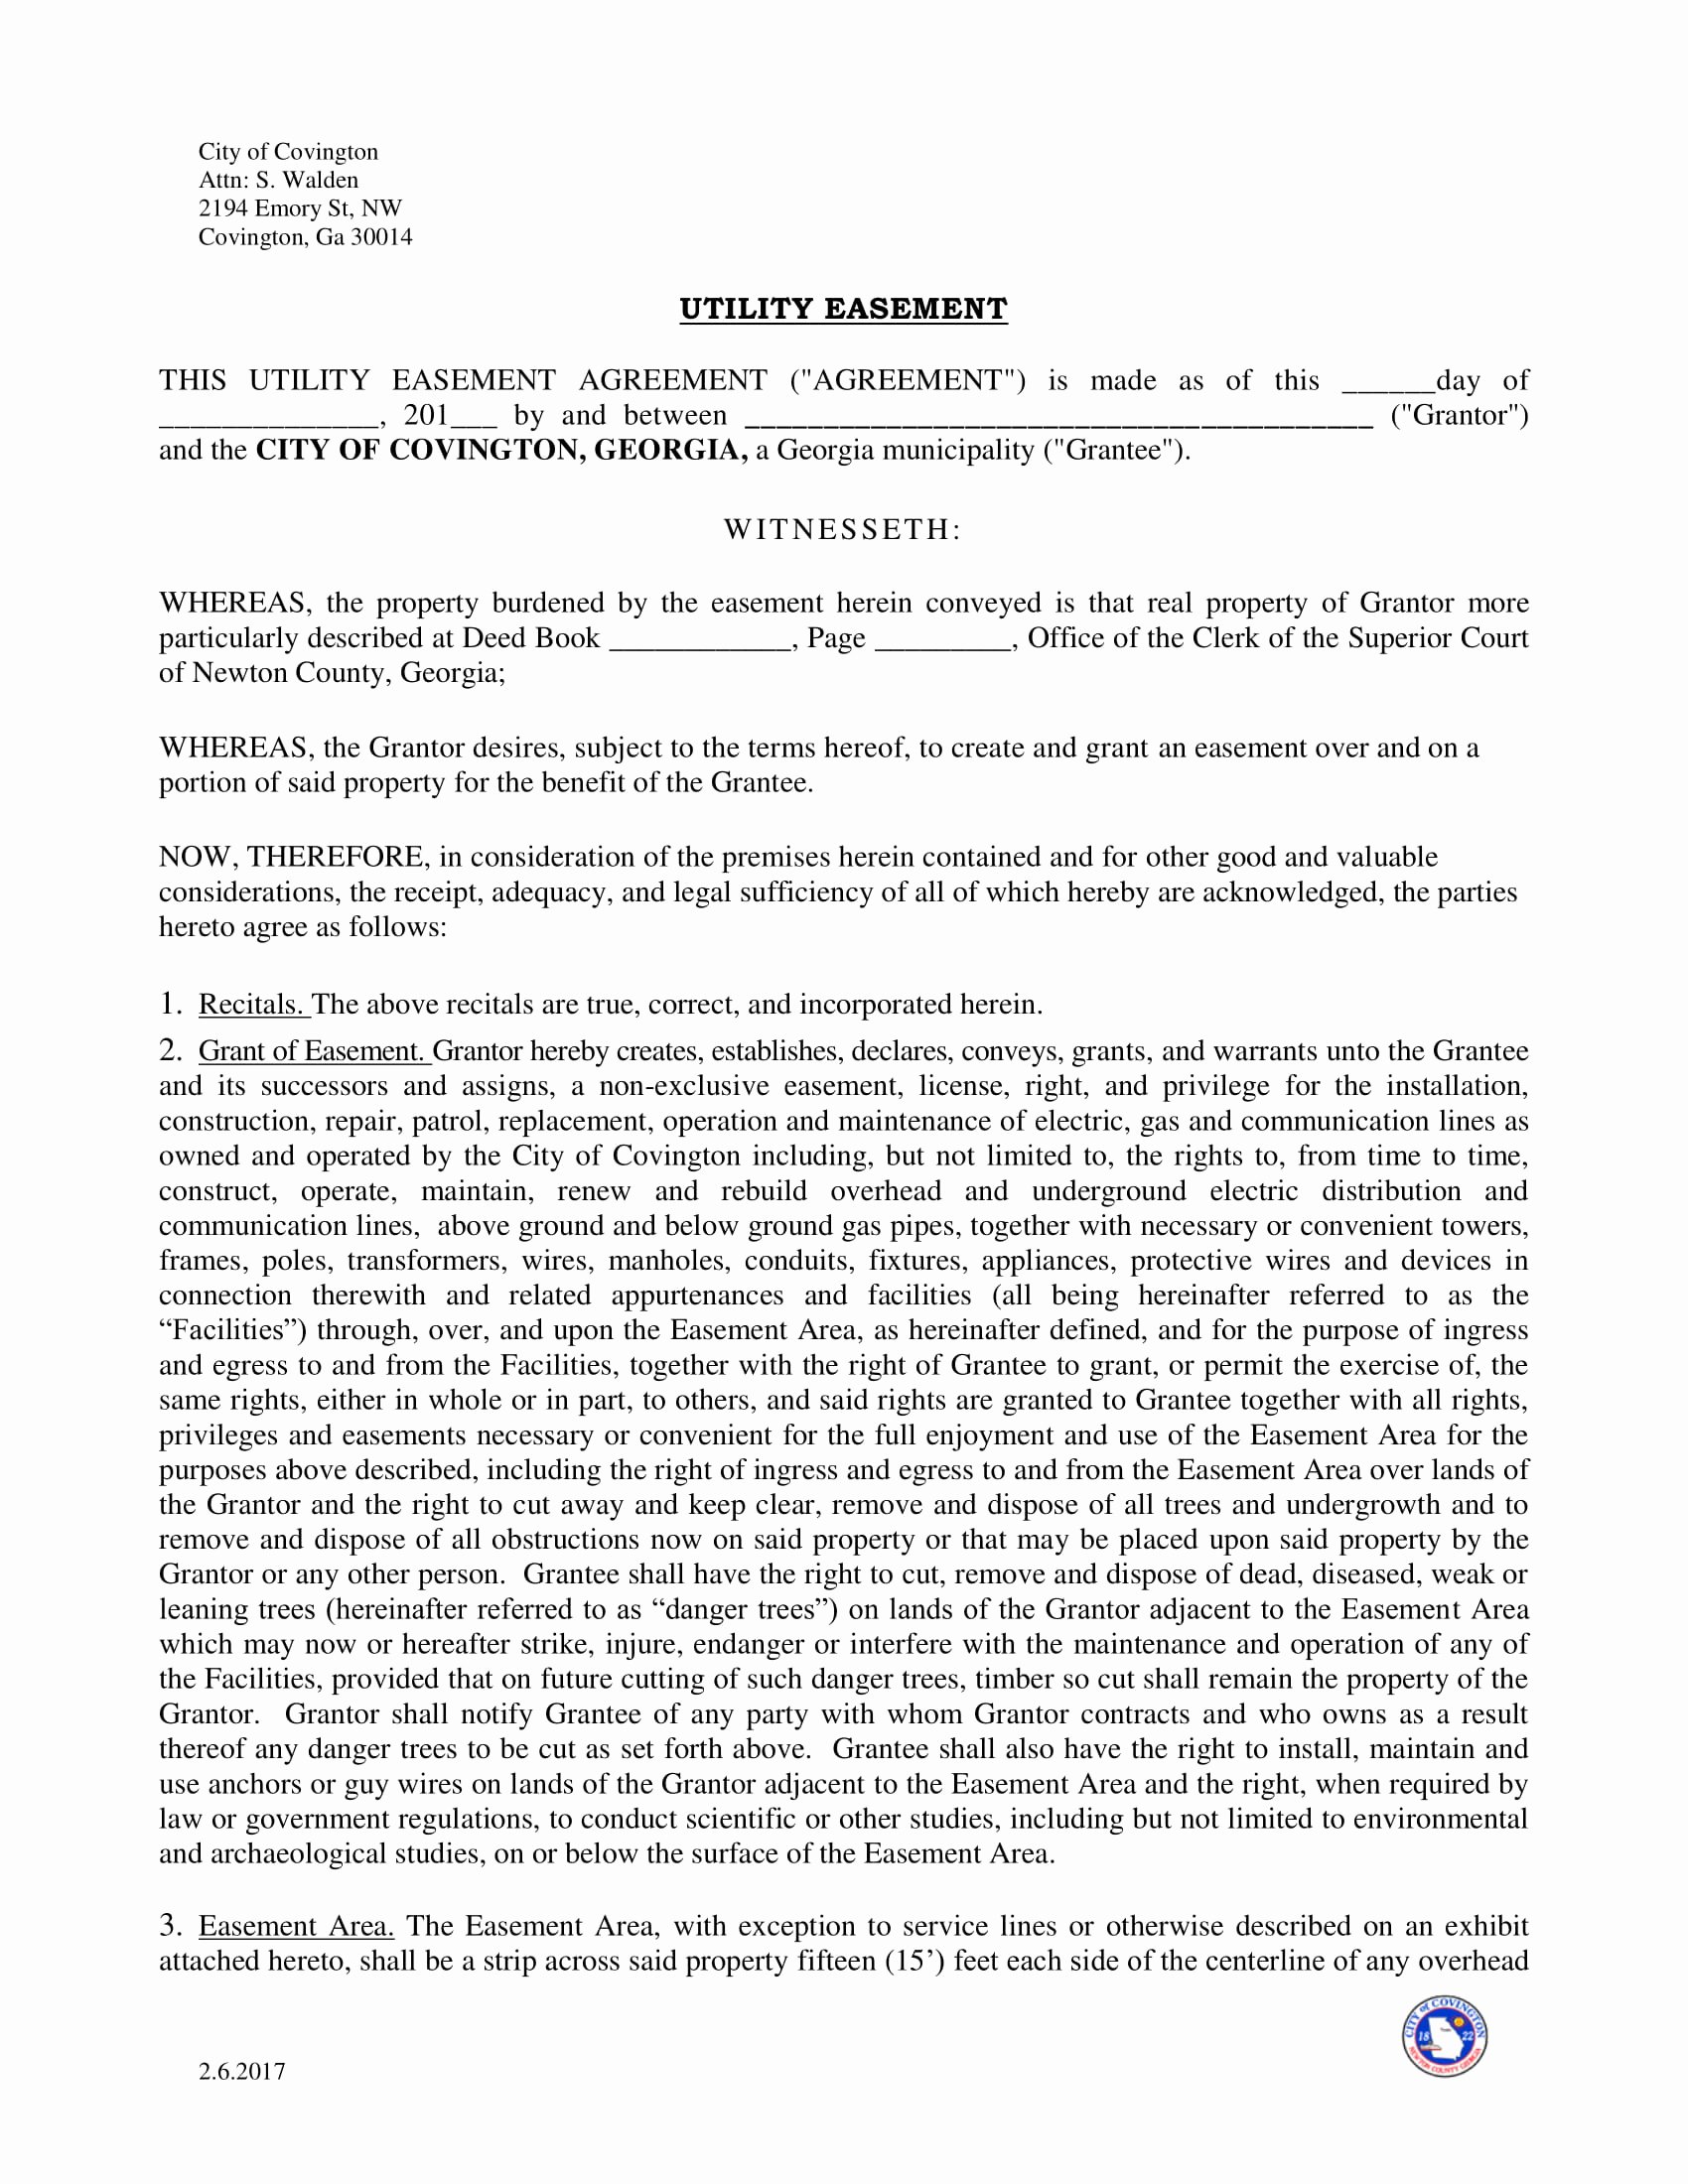 Utility Easement Agreement Template Luxury 10 Easement Agreement Contract forms Pdf